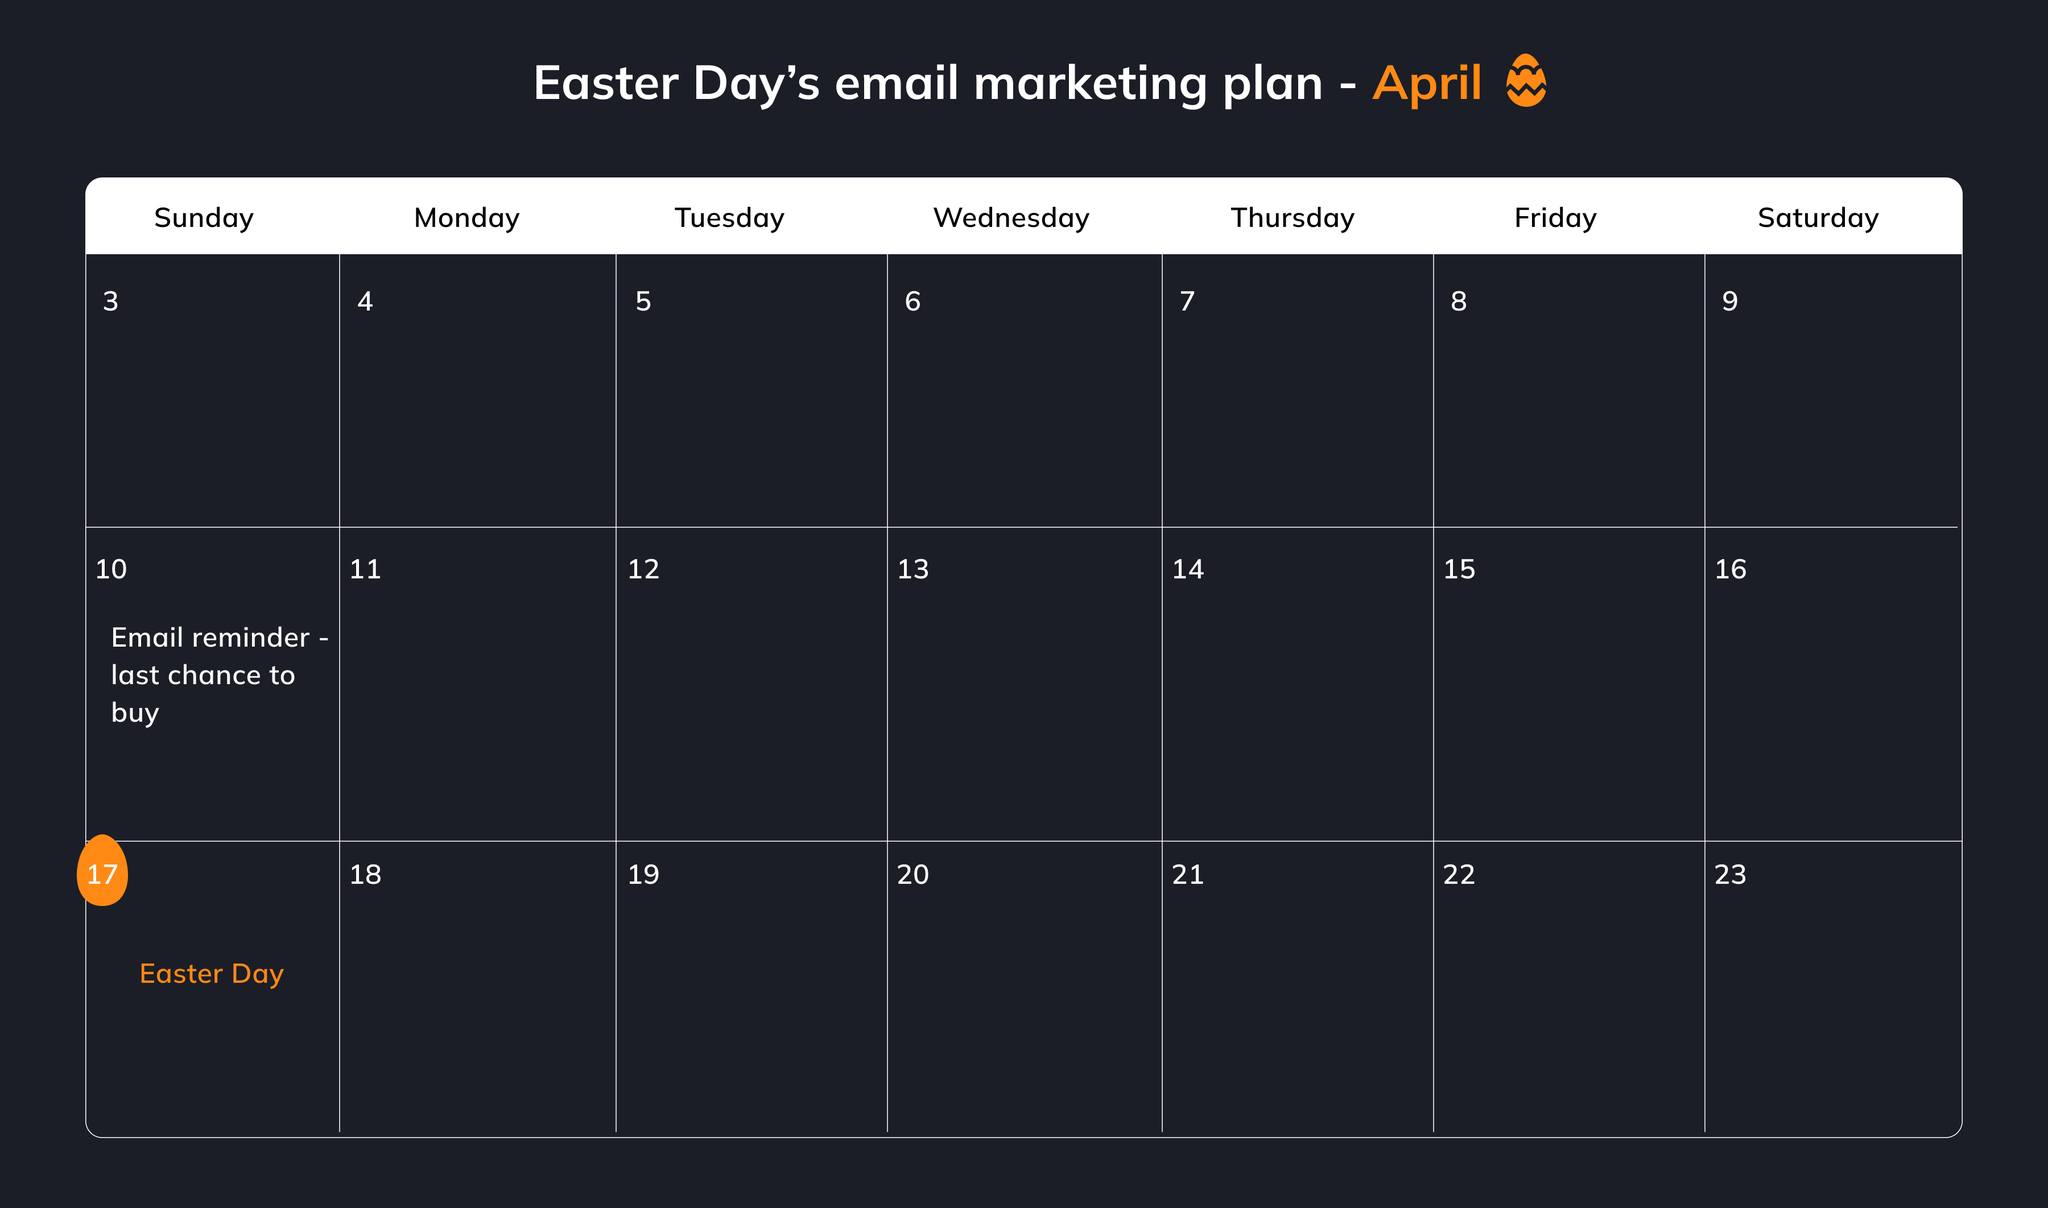 Email marketing mùa Easter Day